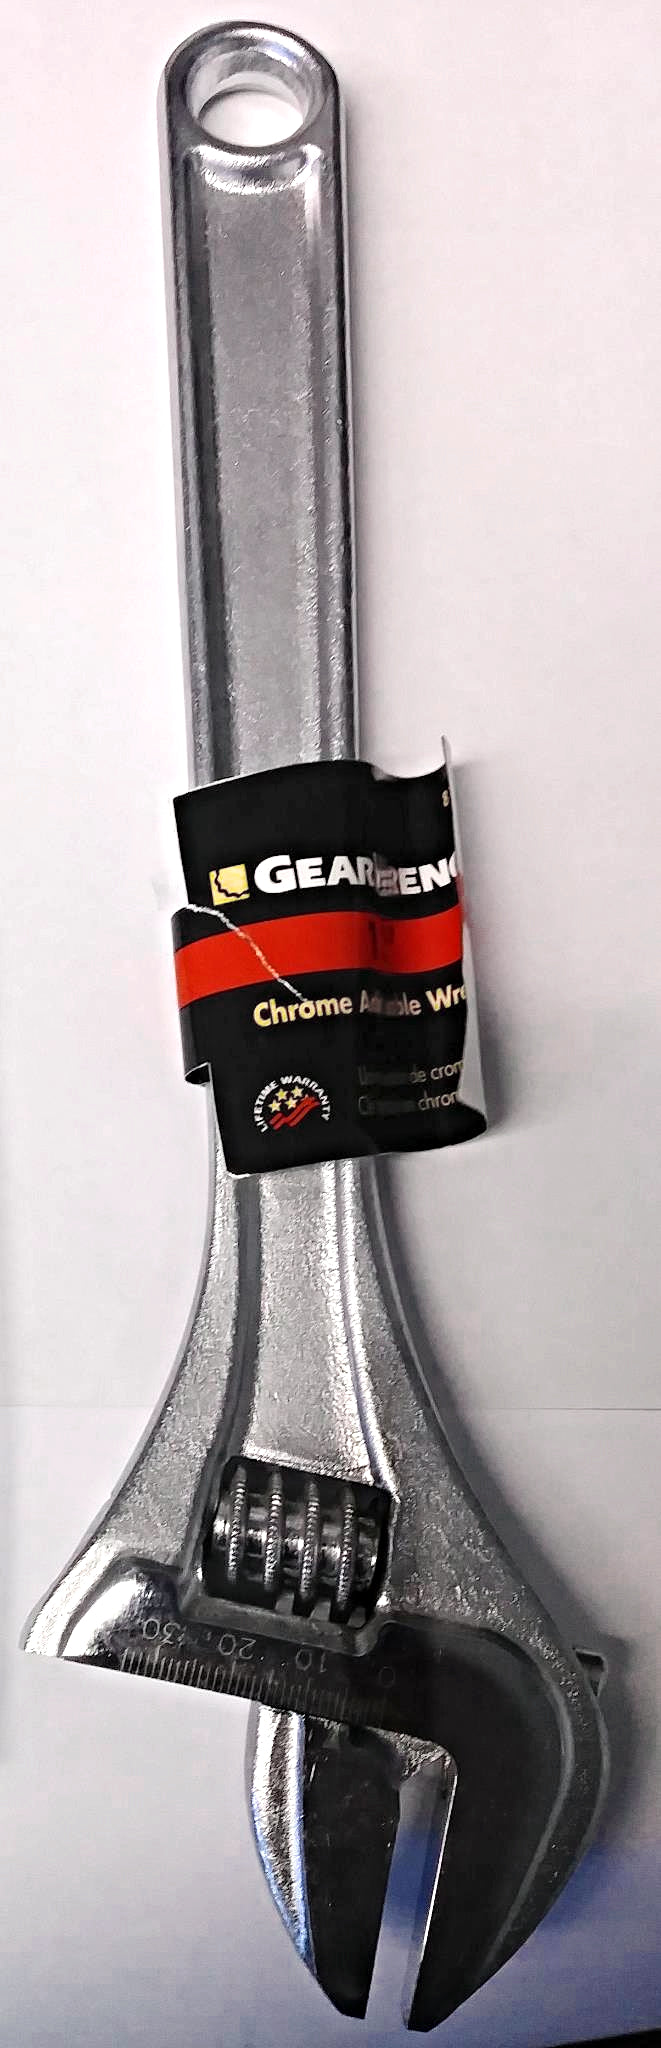 Gearwrench 81884 12" Chrome Adjustable Wrench